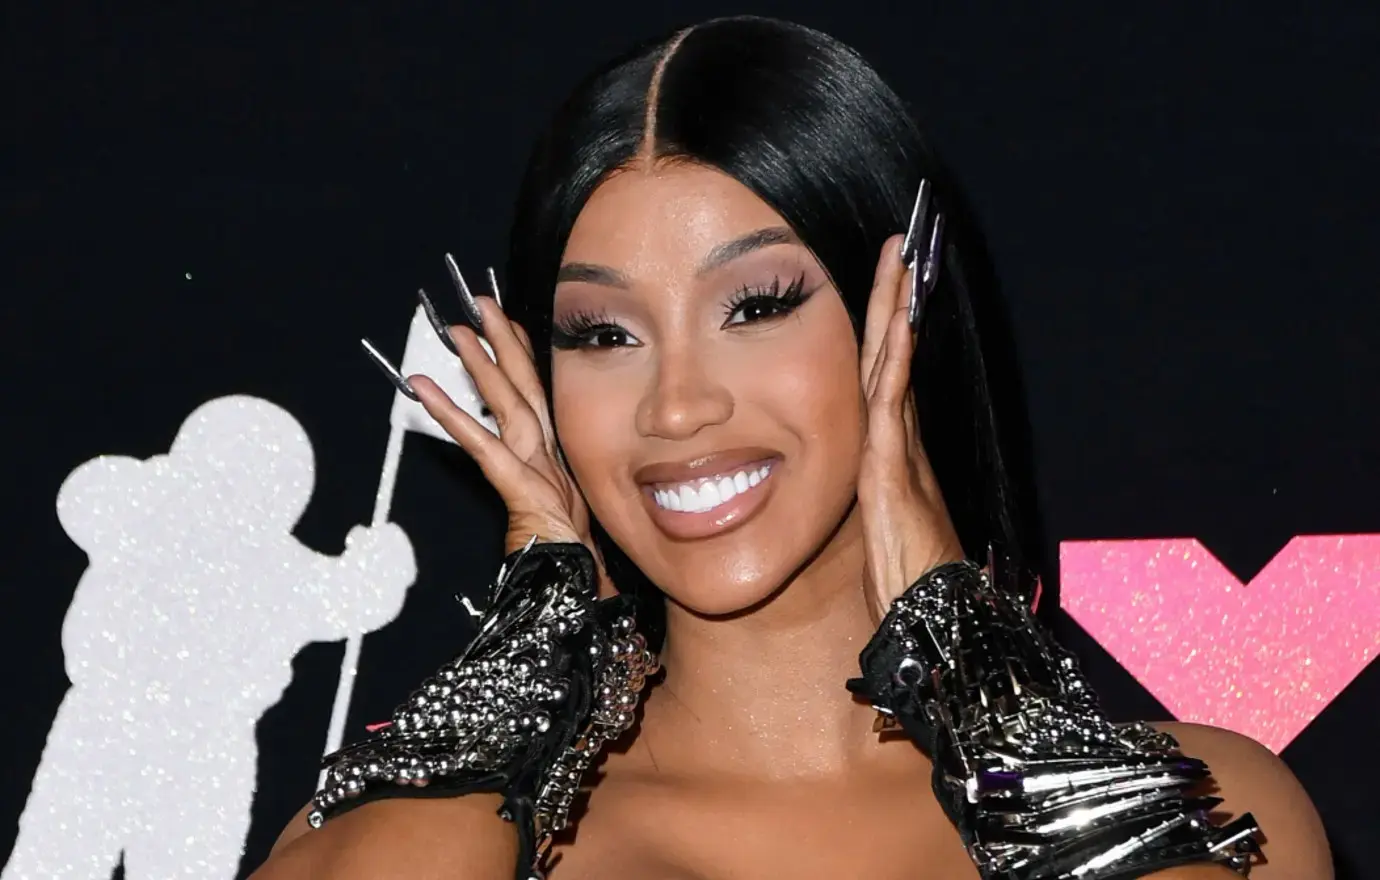 Cardi B Cries During Emotional Instagram Live as She Slams Offset